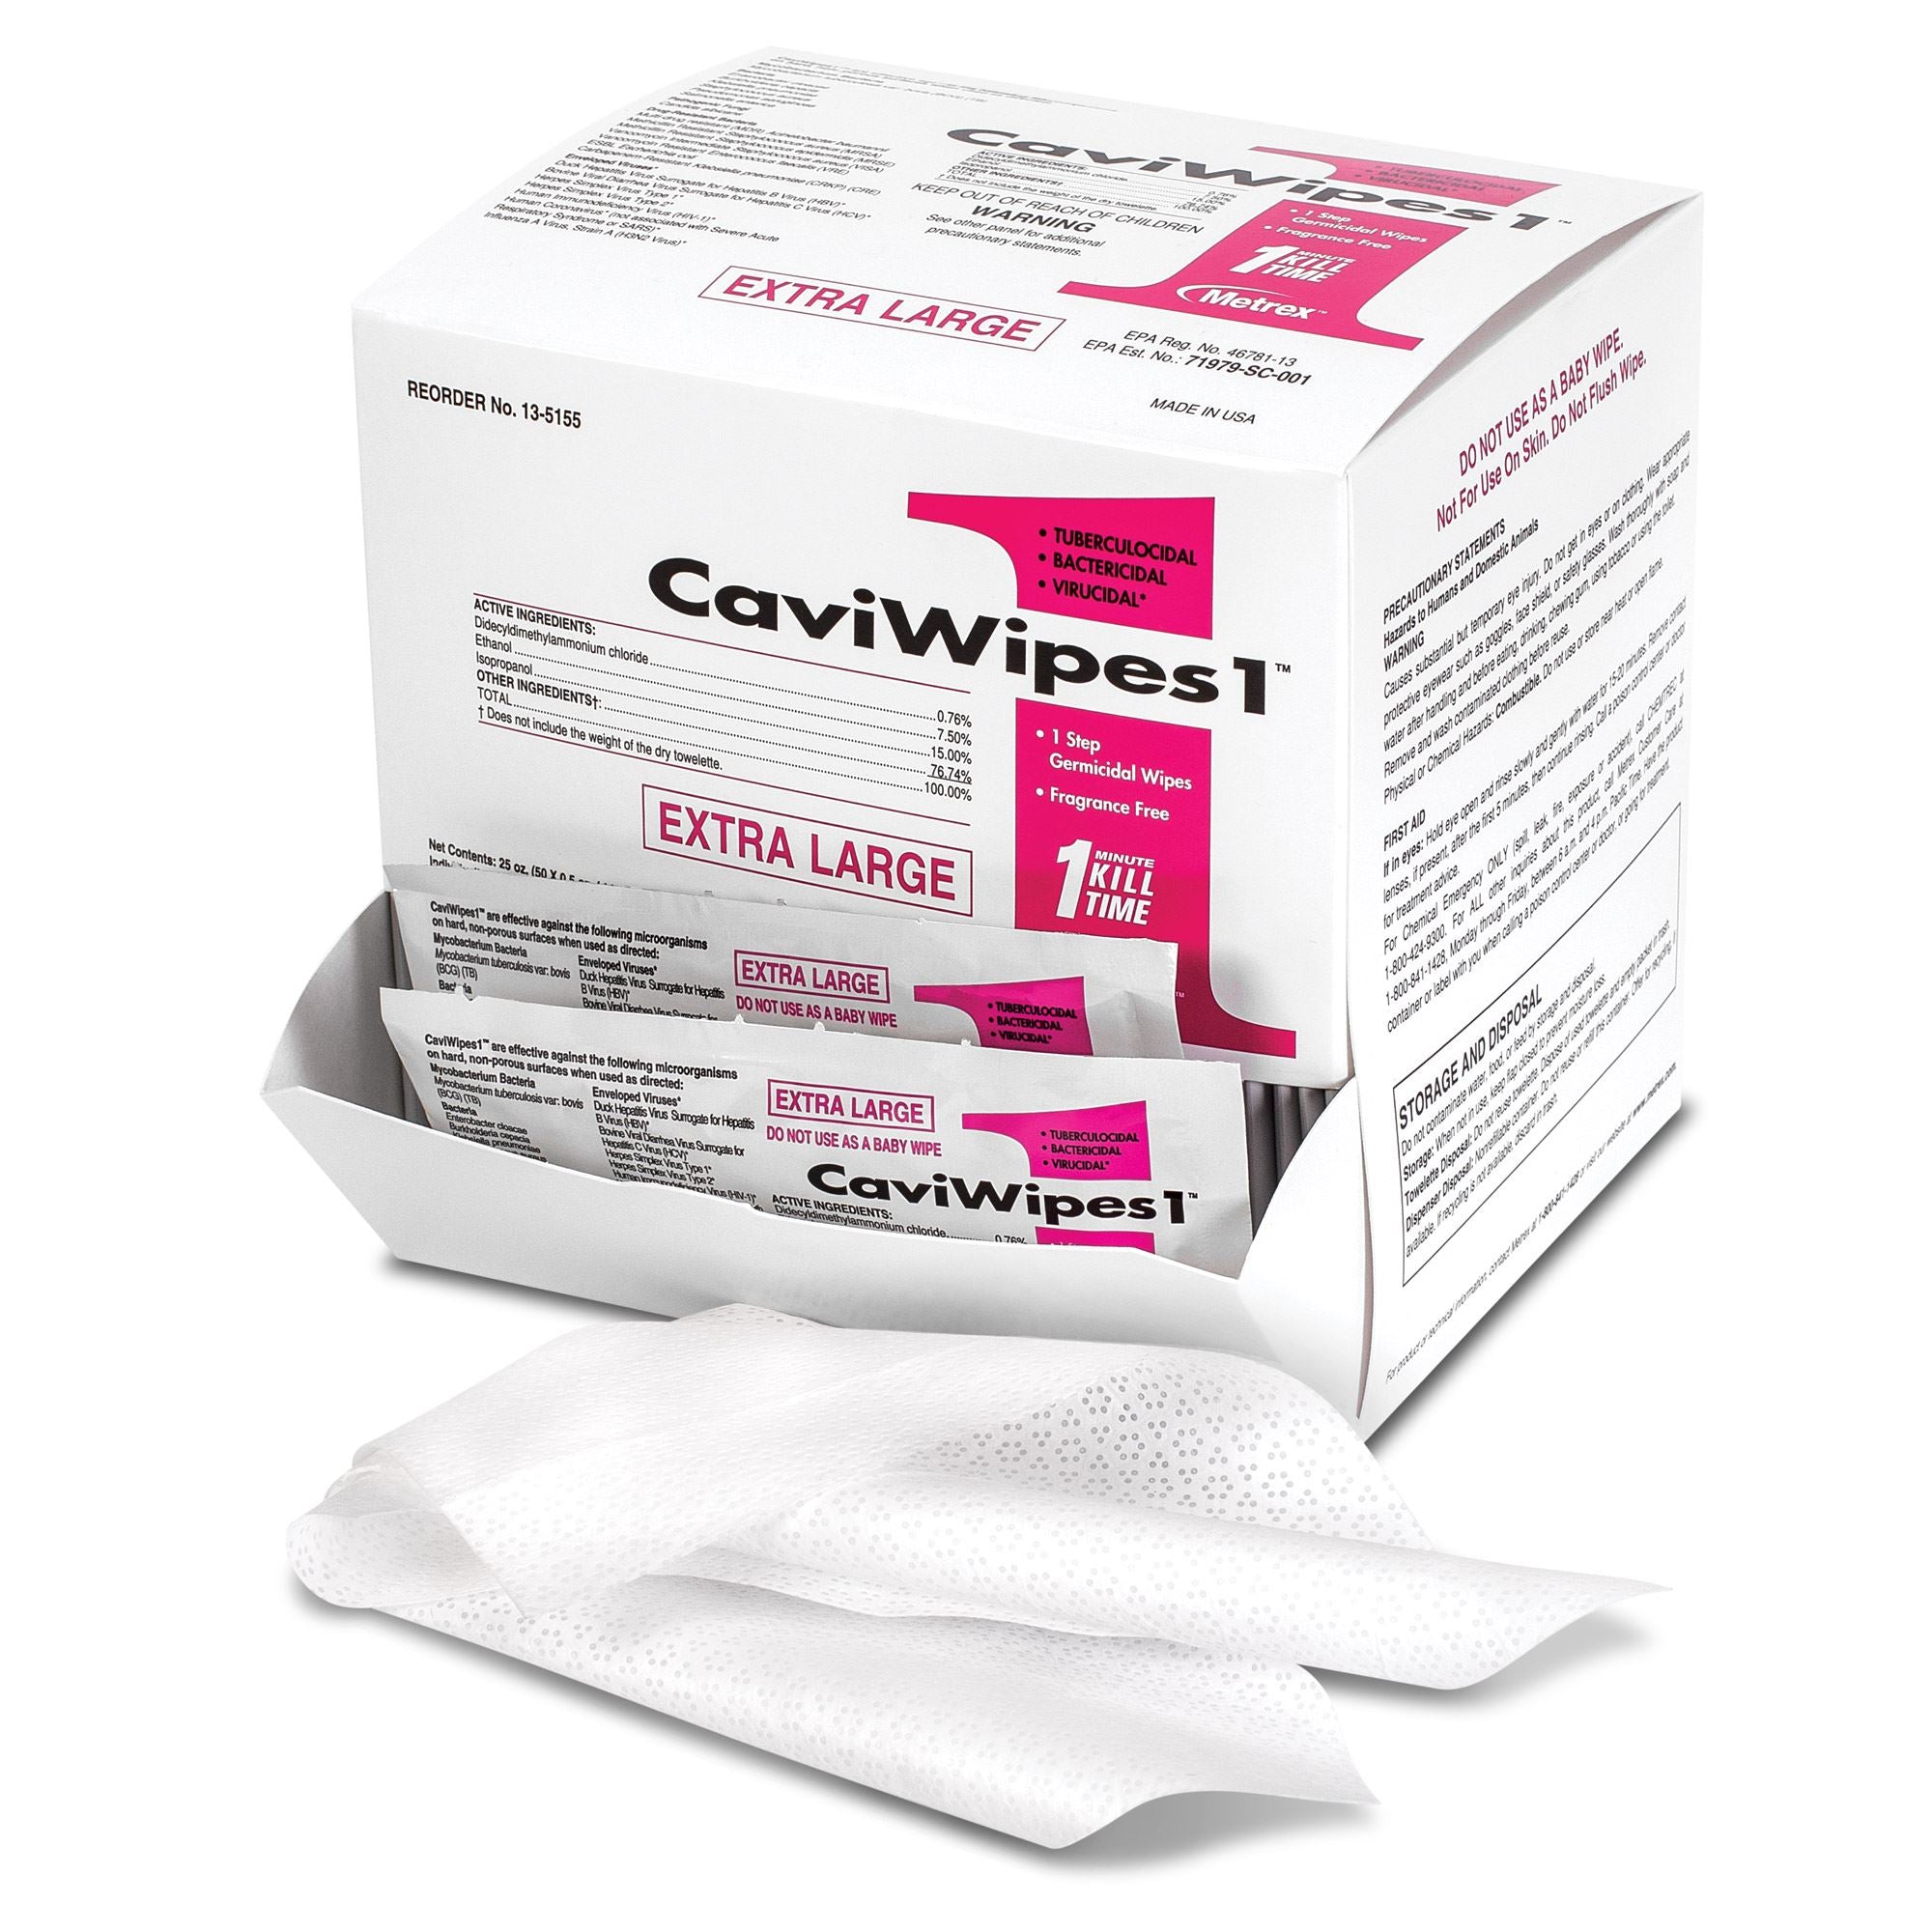 CaviWipes - Package - 3 Minute Effective Kill Time